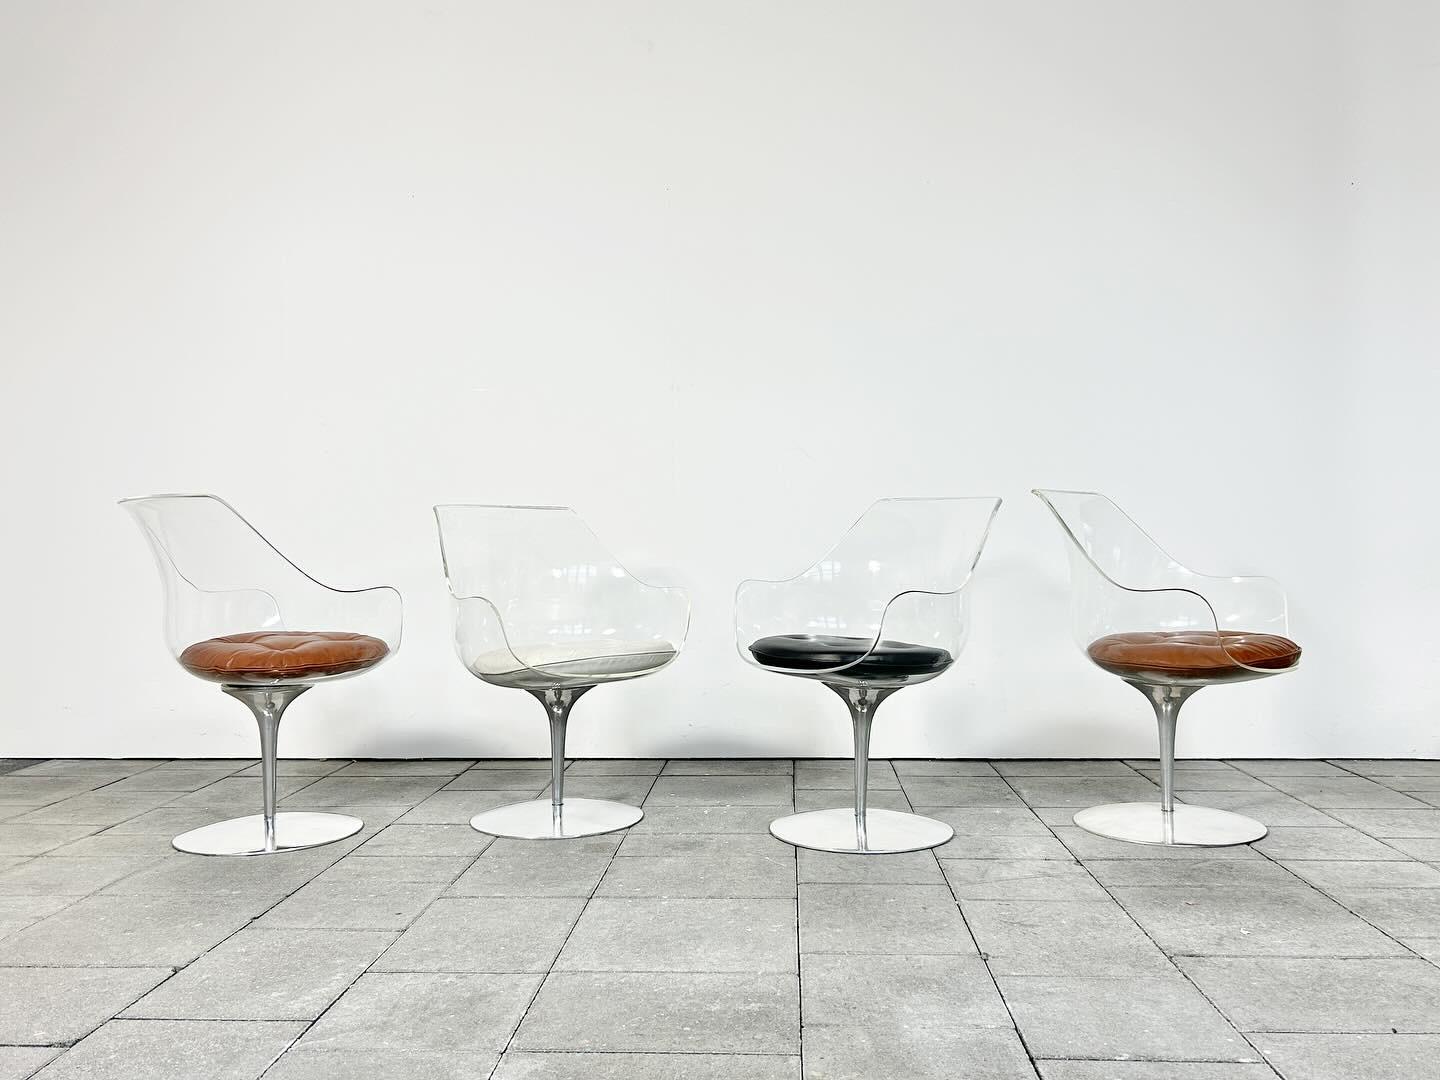 Set of four Lucite Champagner chairs designed by Erwine & Estelle Laverne, ca. 1960

manufactured by Formes Nouvelles, in France.

We have a 2nd set of four Champanger chairs available for sale, that you’ll find in our storefront here on 1stdibs !